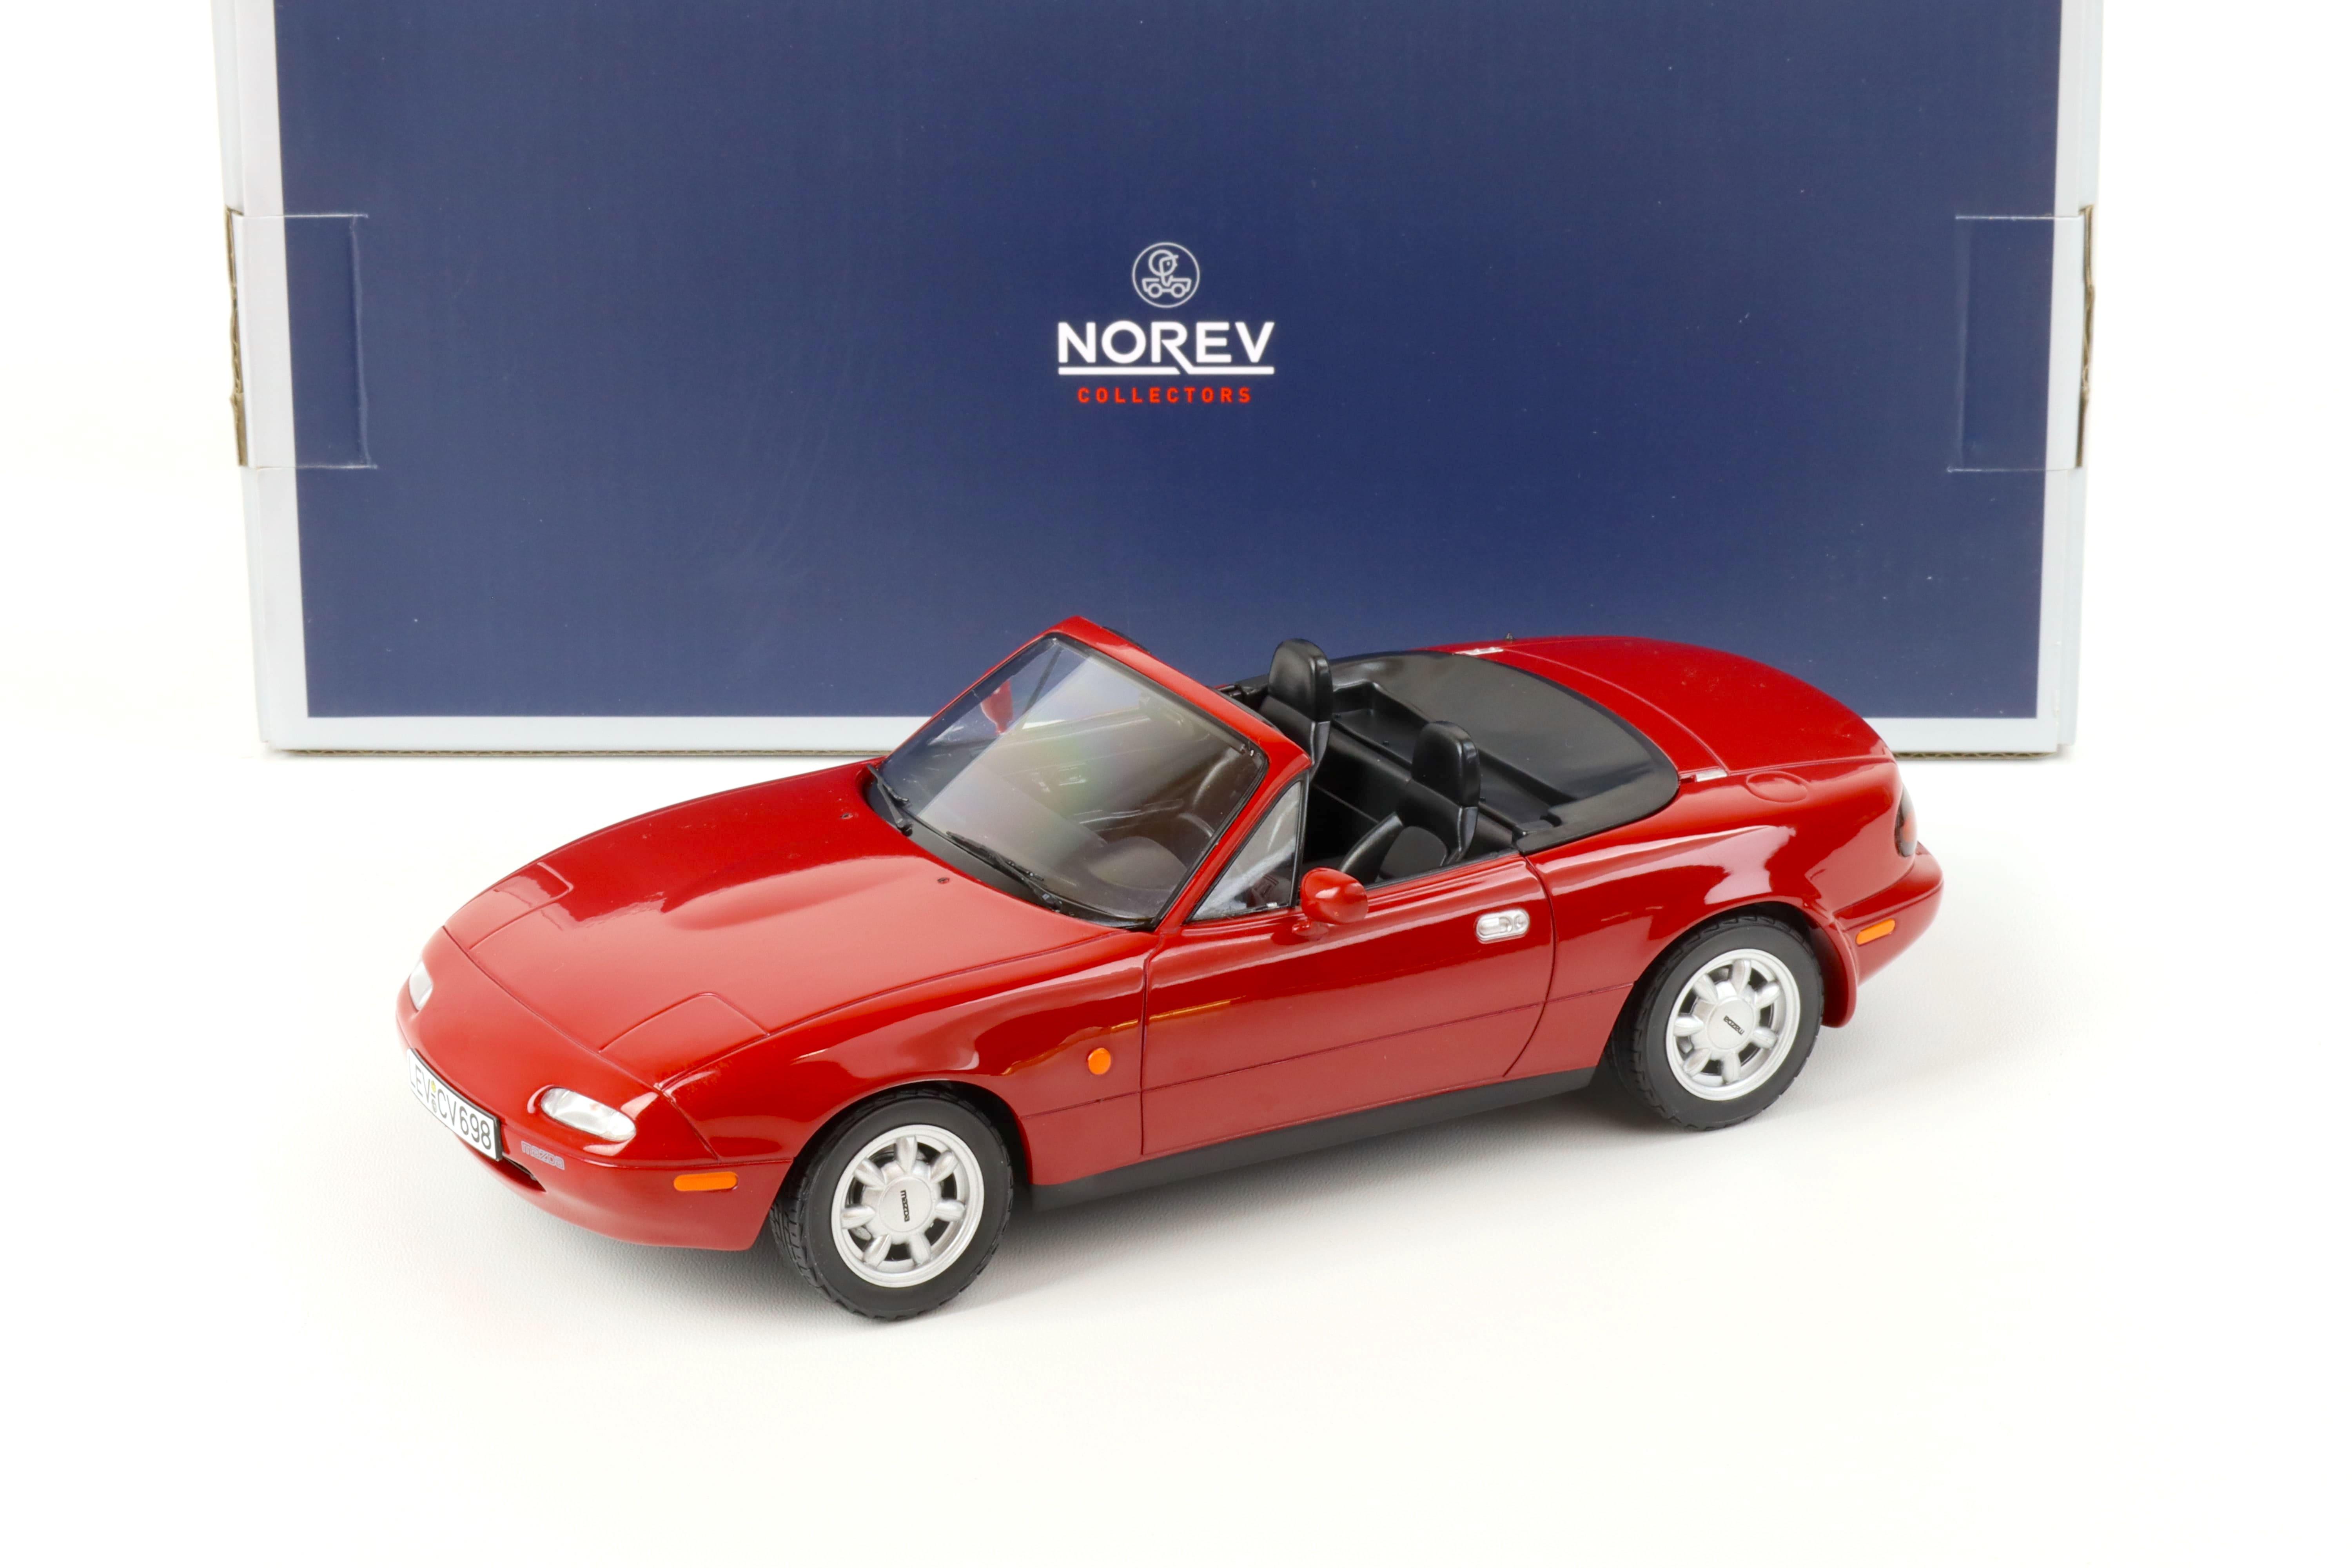 1:18 Norev Mazda MX-5 Roadster with Hardtop 1989 red 188020